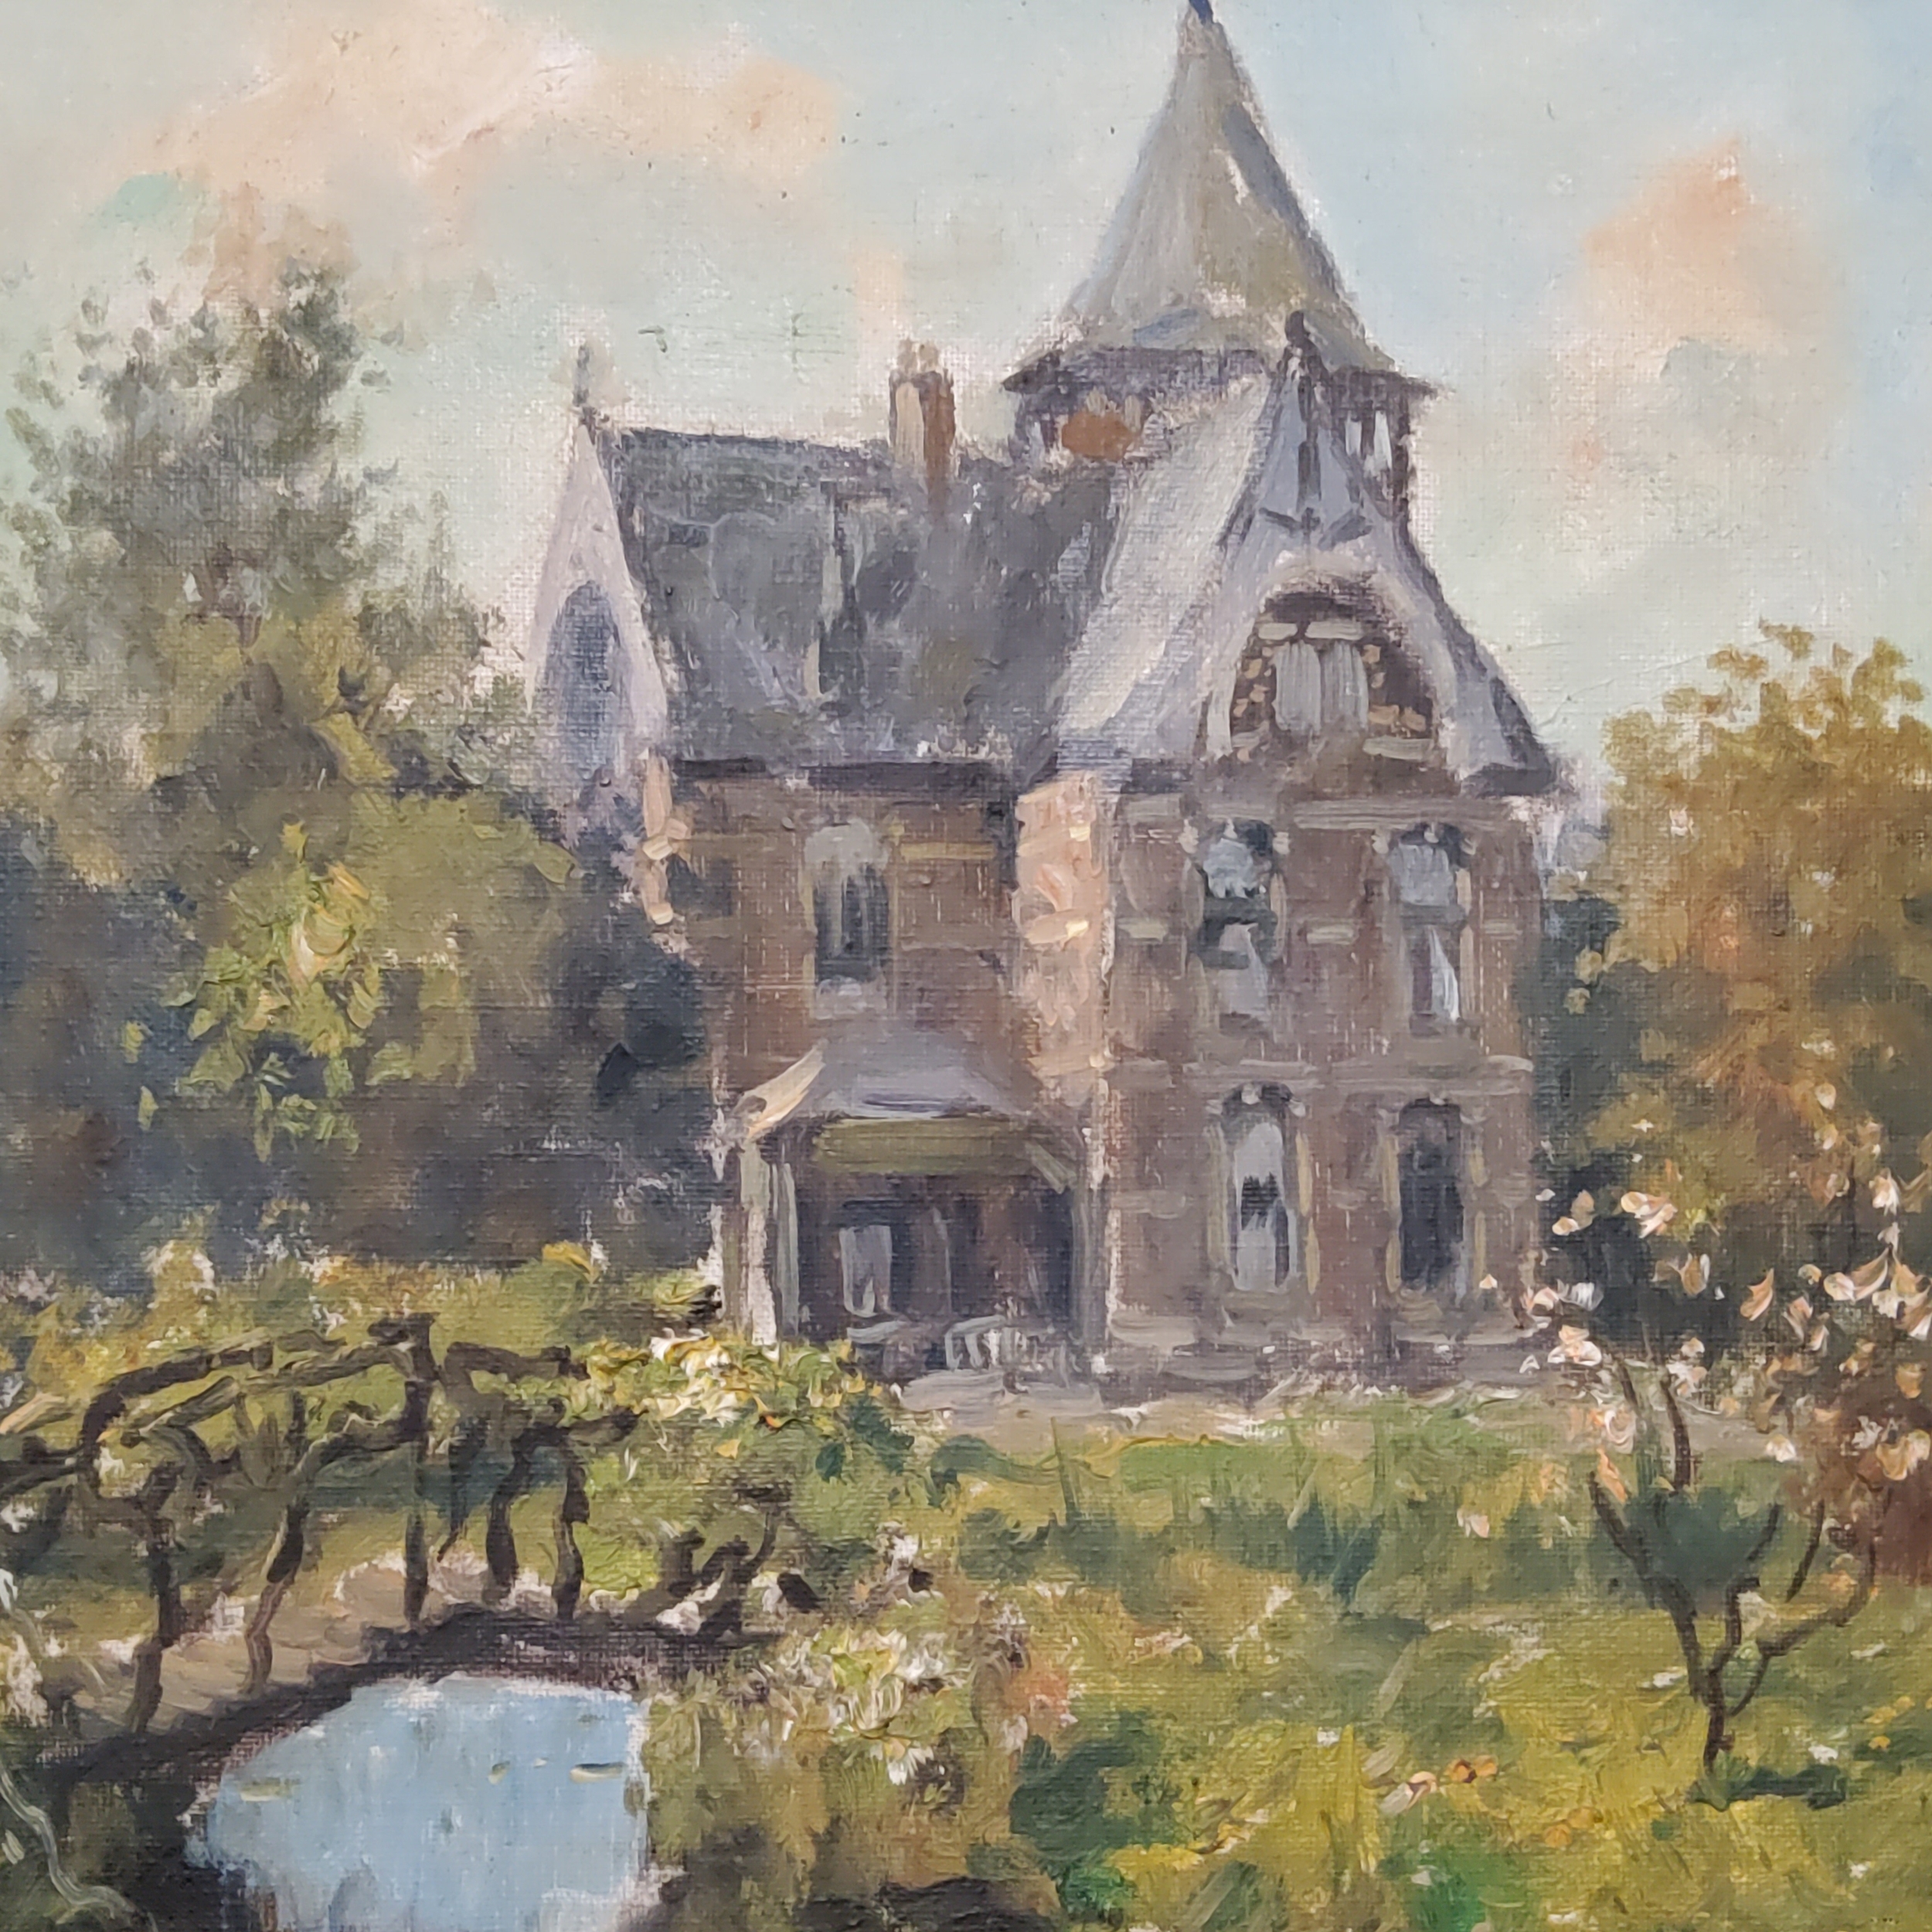 Dutch School (Early 20th century) Country House  Oil on canvas, indistictly signed. Period ornate - Image 3 of 3